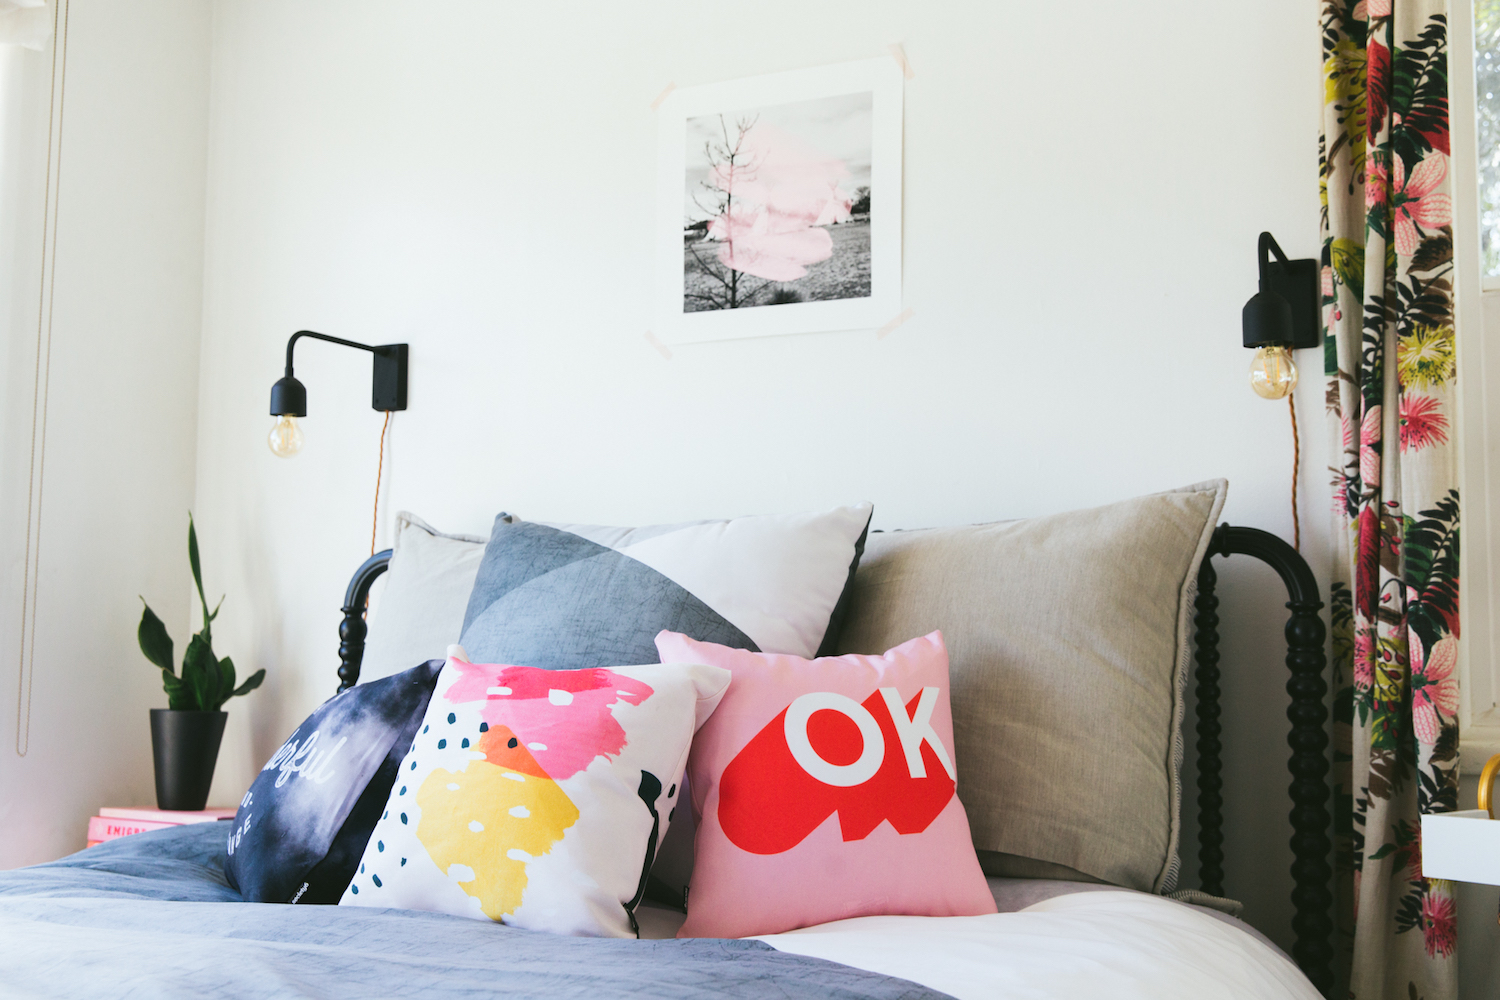 Sitting Pretty: Here's 5 Fun Ways To Use Floor Pillows - Society6 Blog